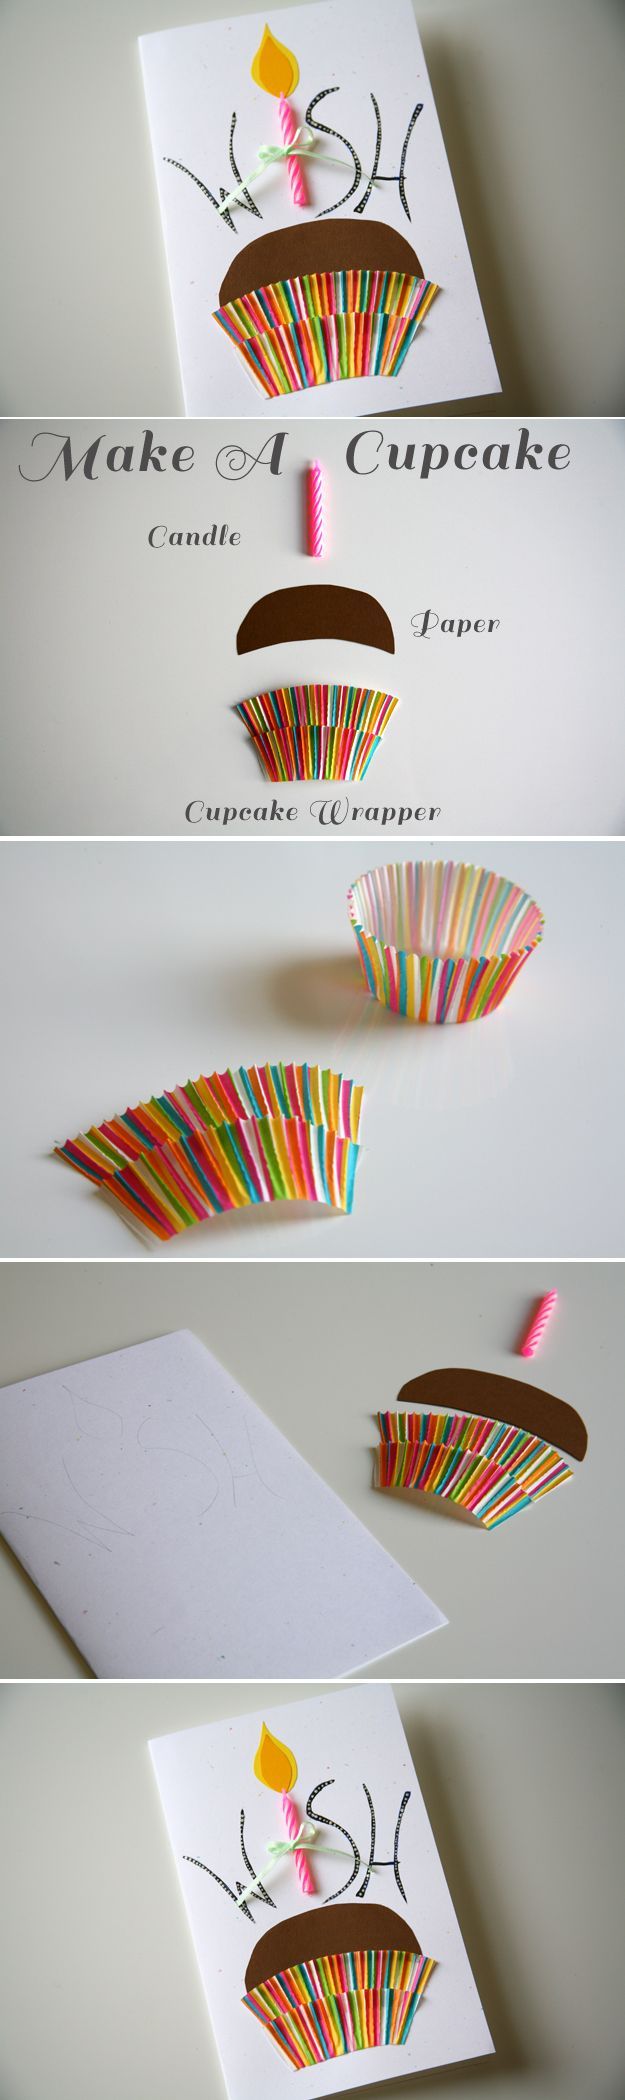 Clever handmade cupcake birthday card using an actual paper cupcake holder and candle.